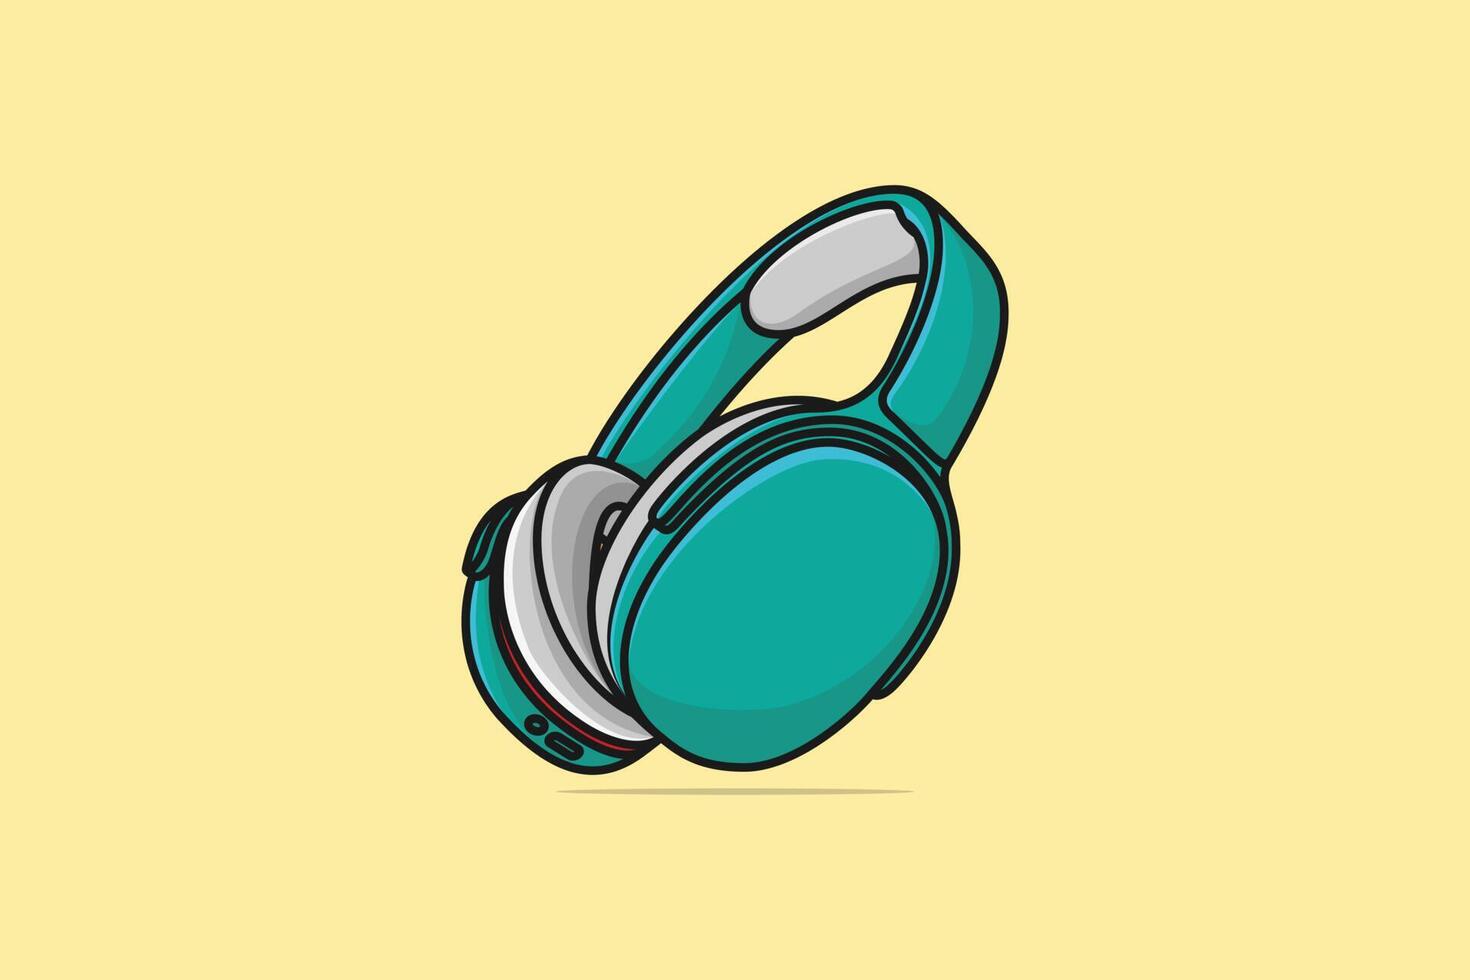 Music Headphone Device vector illustration. Sports and recreation or technology object icon concept. Wireless headphone for games and music vector design with shadow. Music studio logo design.